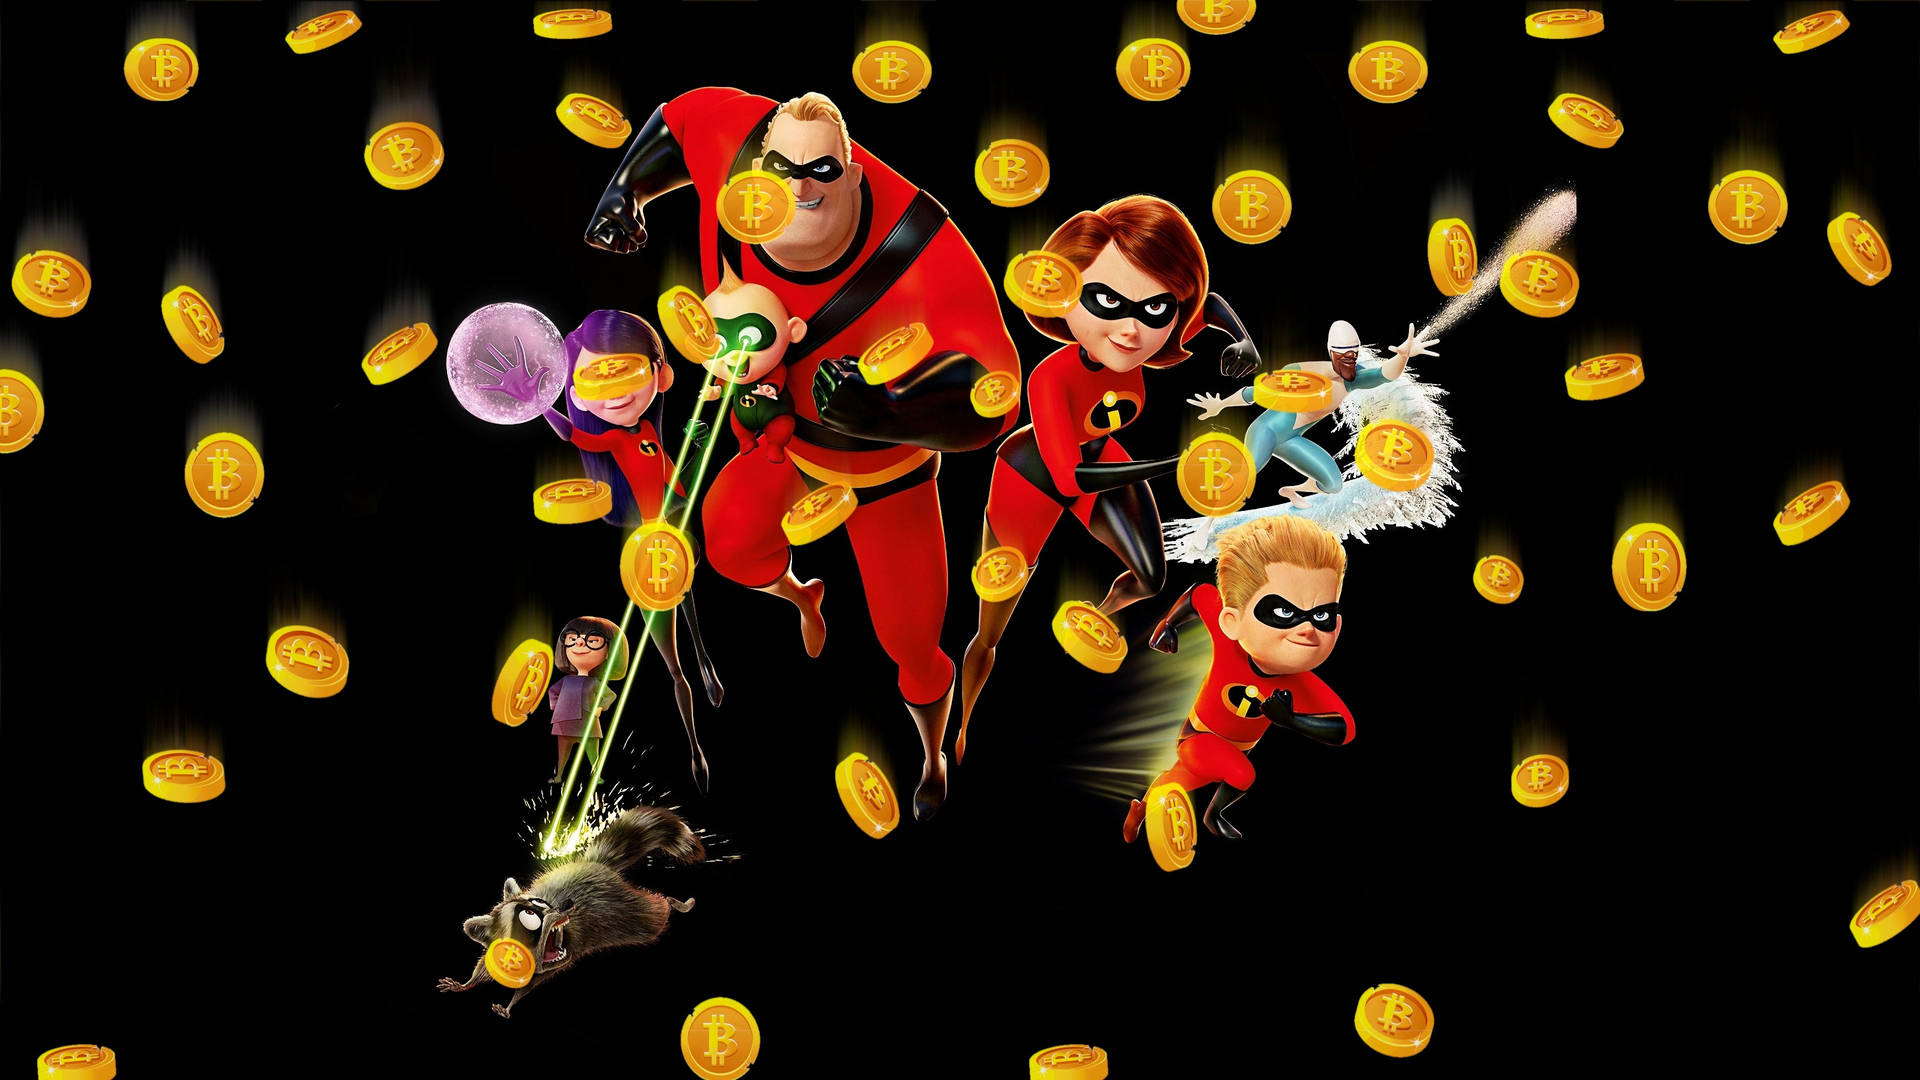 Bitcoin Incredibles 2 Background